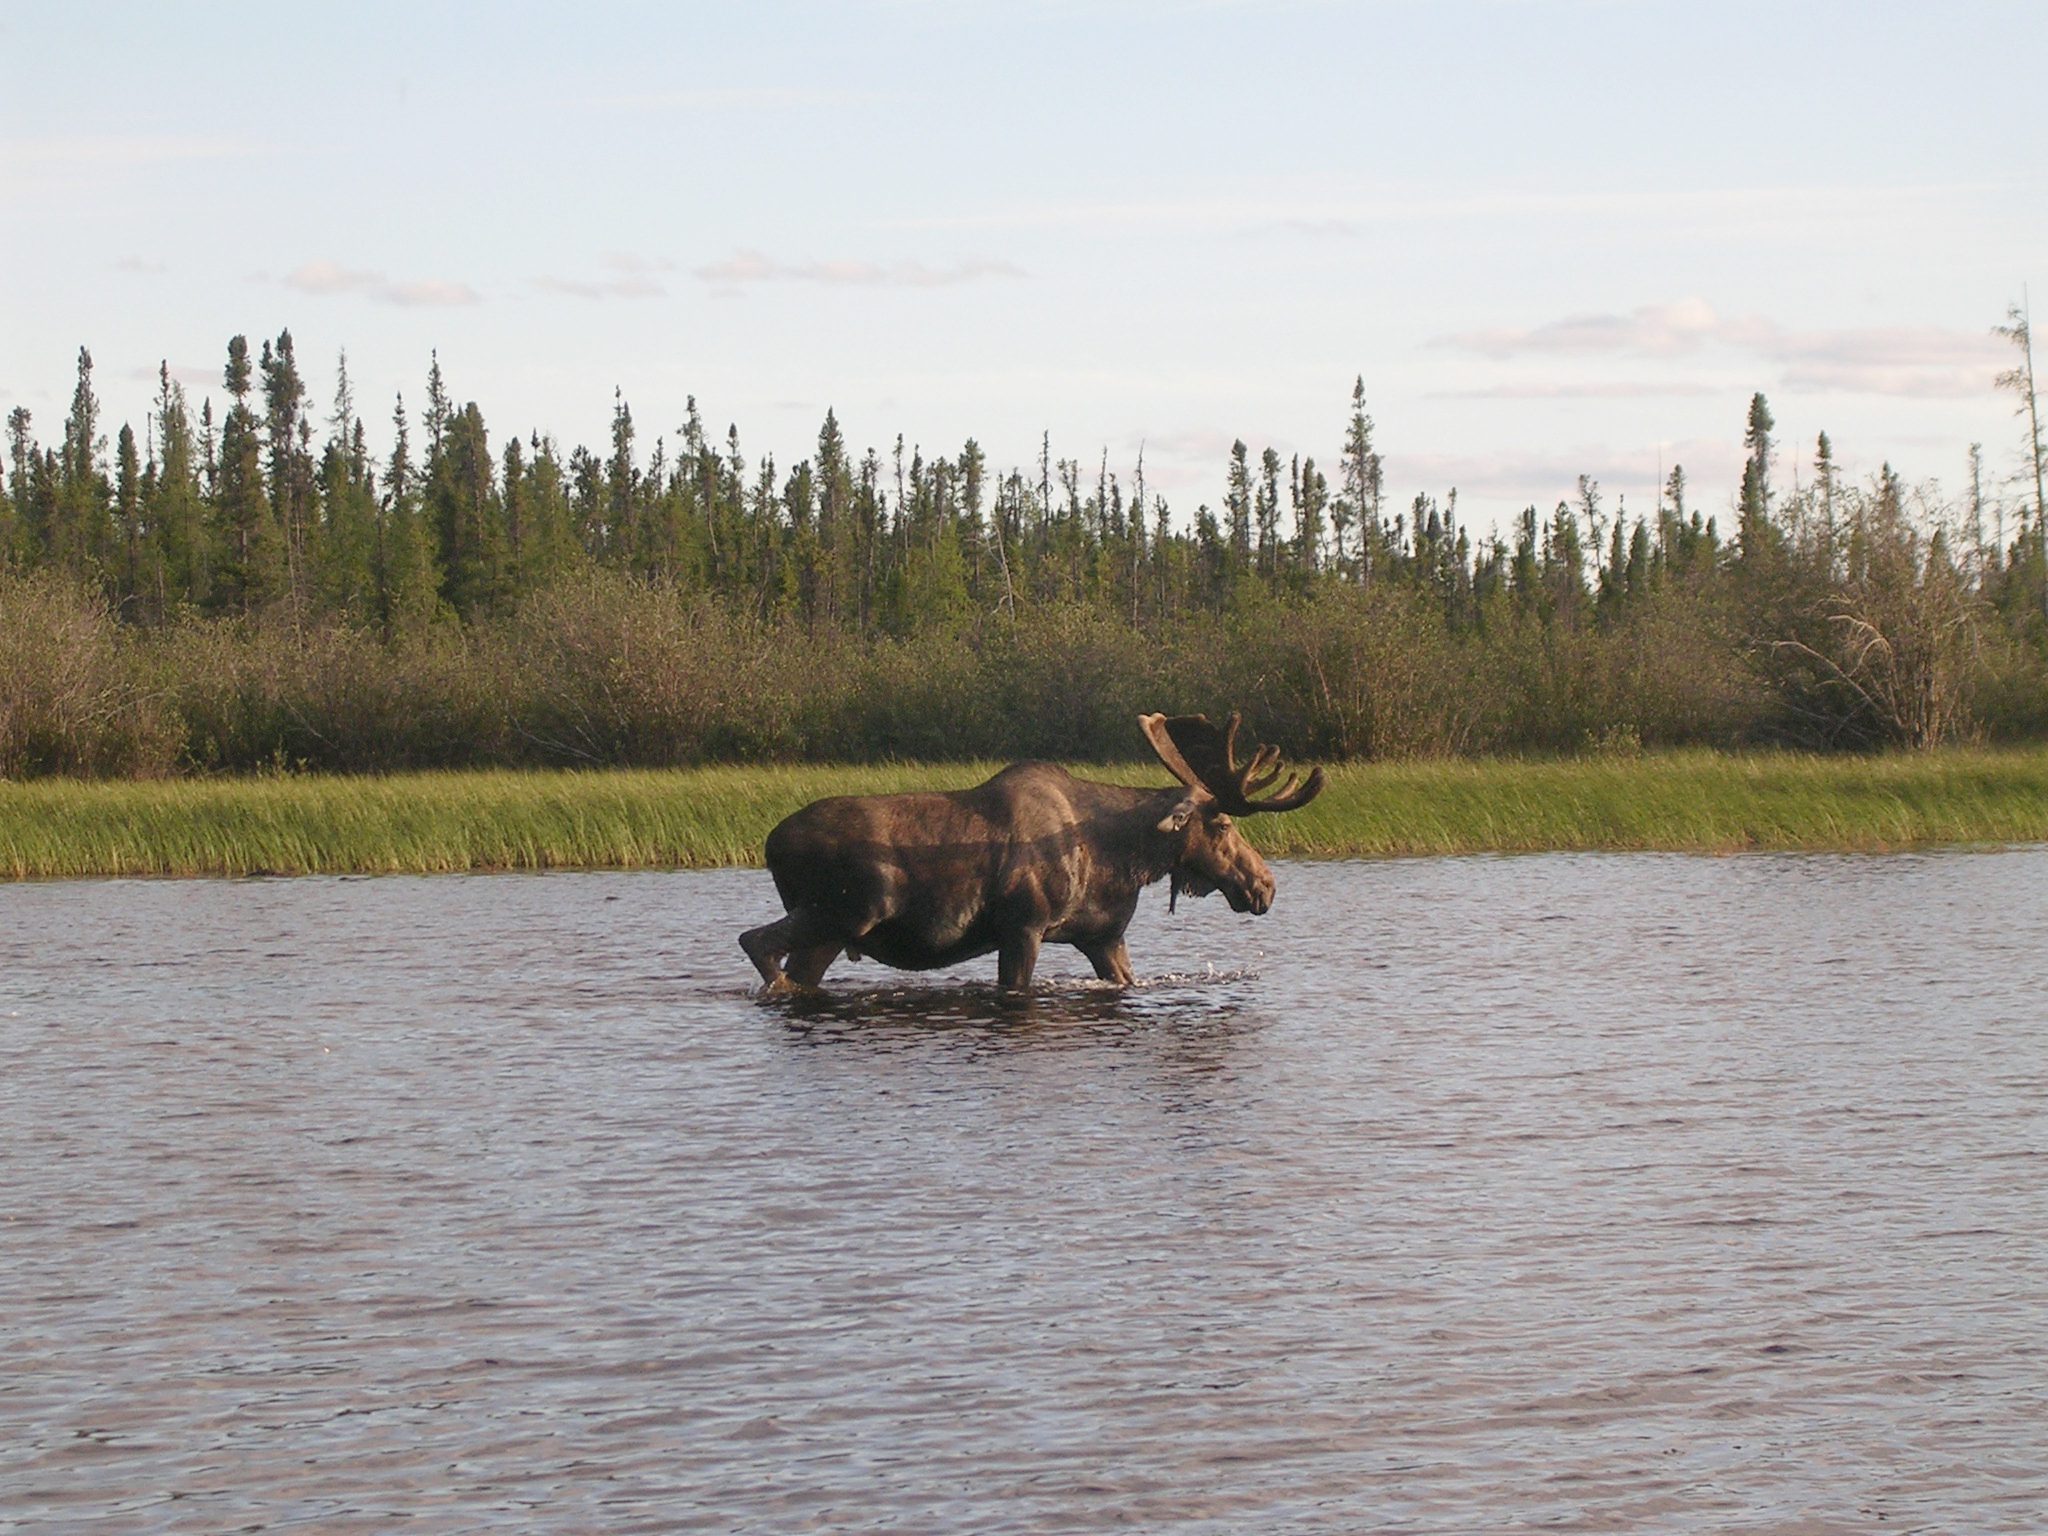 A long moose standing in the water.